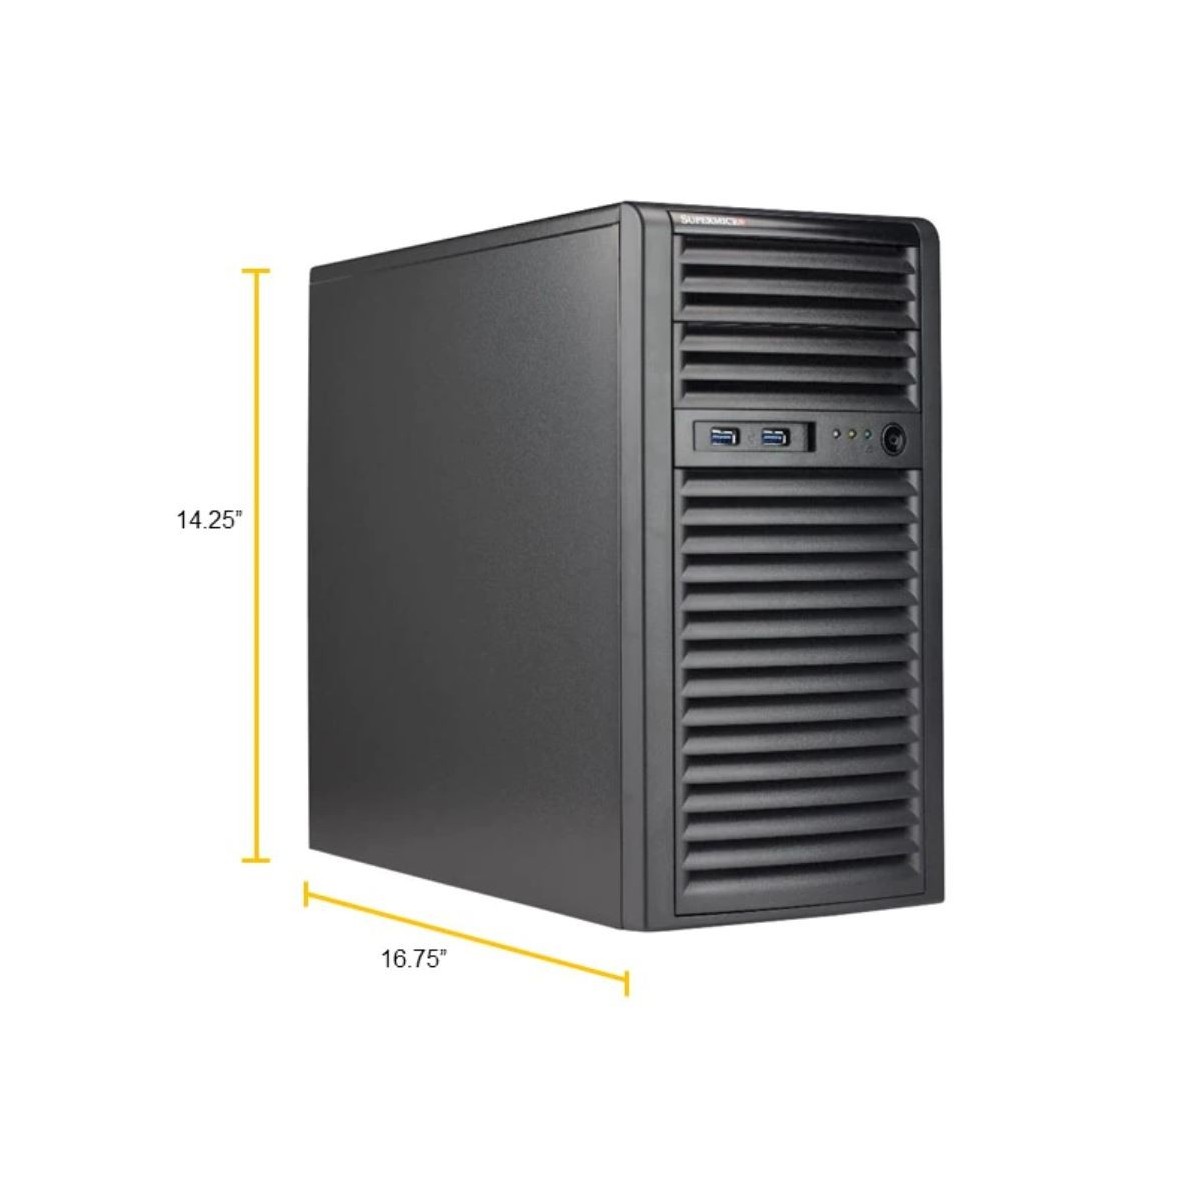 Supermicro SuperServer 530T-I